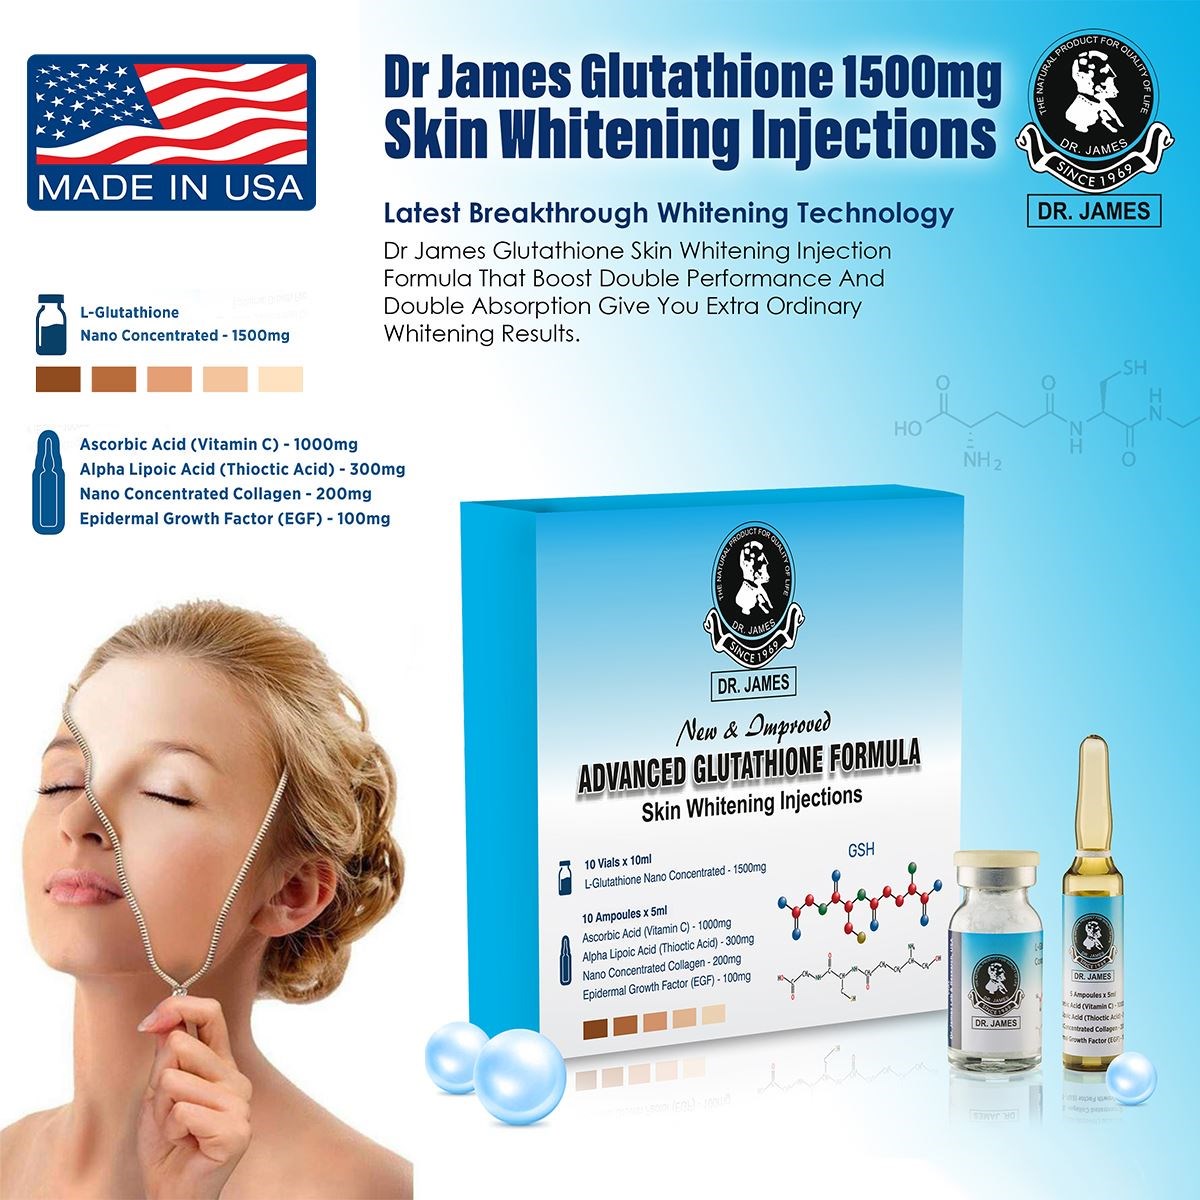 Dr James Glutathione Injection 1500mg Skin Whitening Injection - 05 Sessions / 10 Sessions - Made In USA - FDA Approved